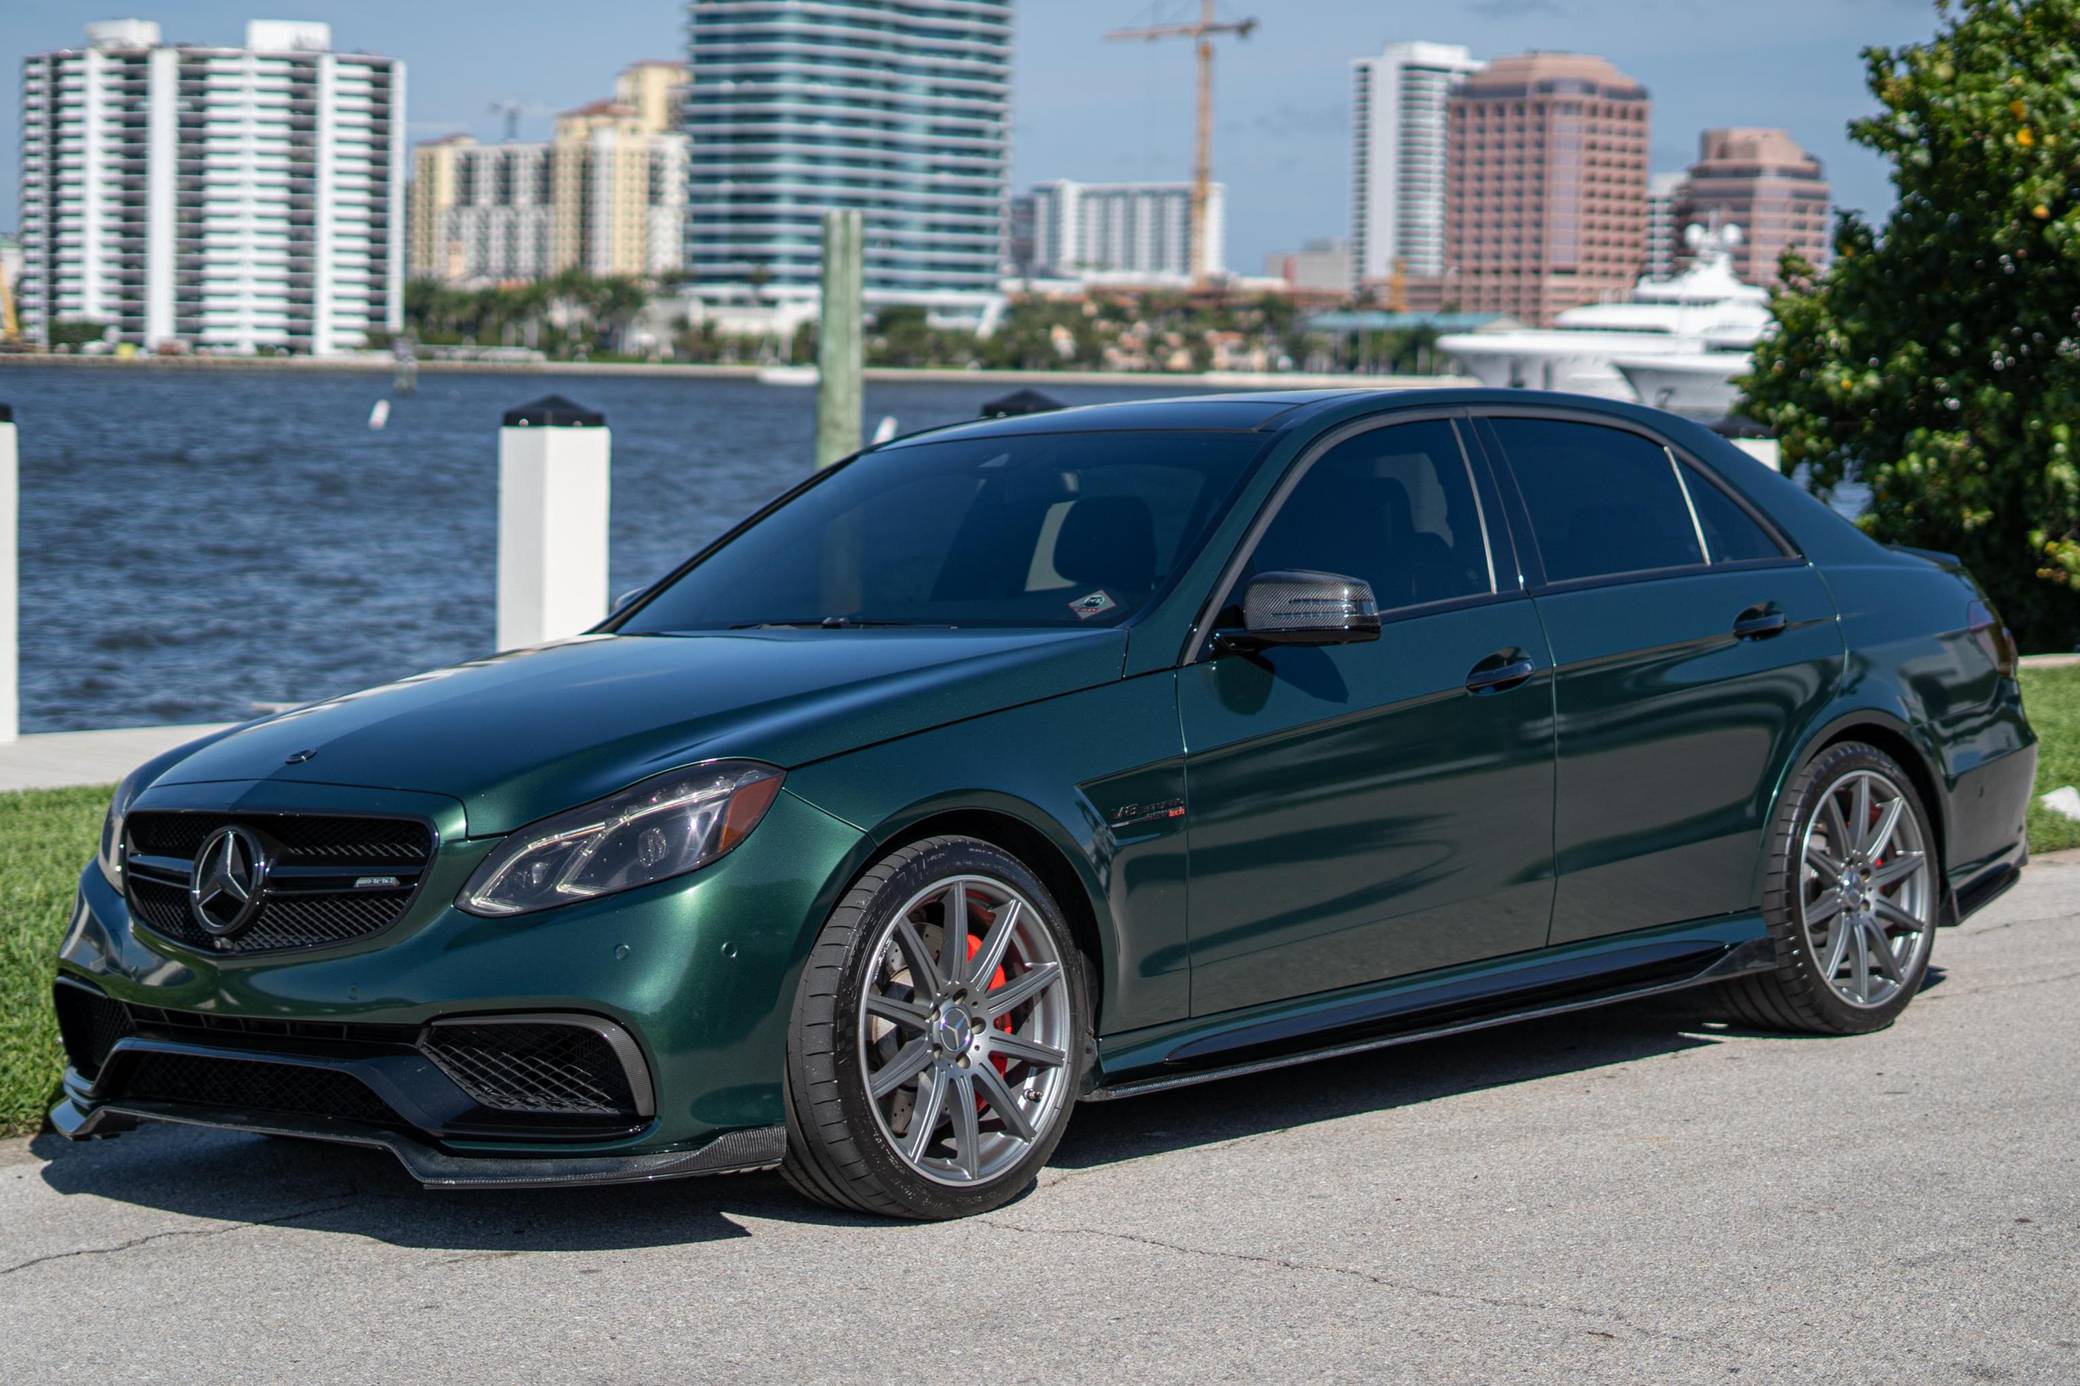 Mercedes E63s AMG wrapped in ceramic matte green 😍👌 What do you